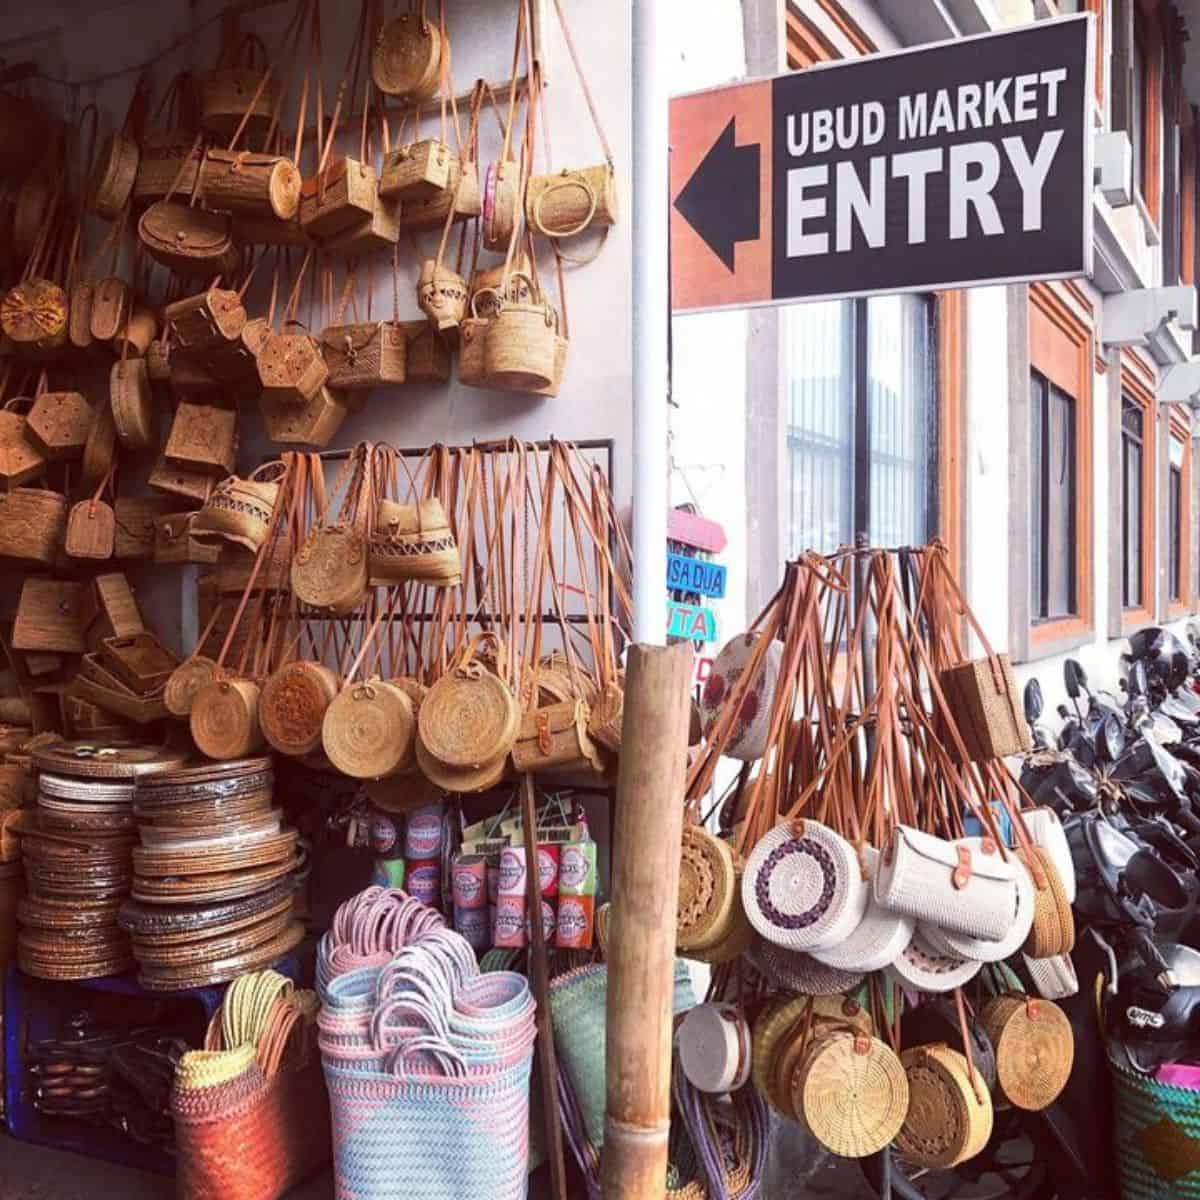 Handcrafted souvenir items with an Ubud Market entry signage